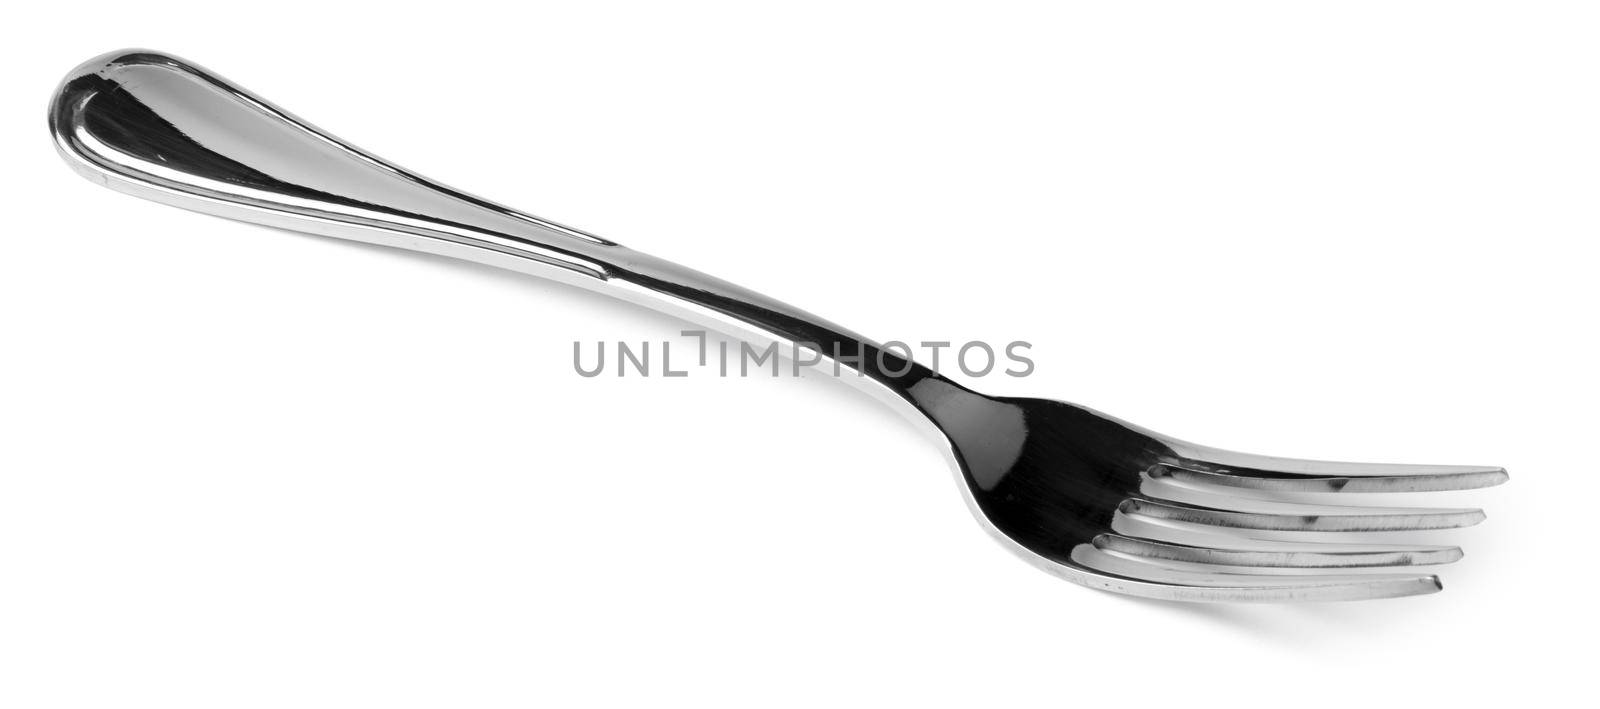 Silver dining fork isolated on white background by Fabrikasimf